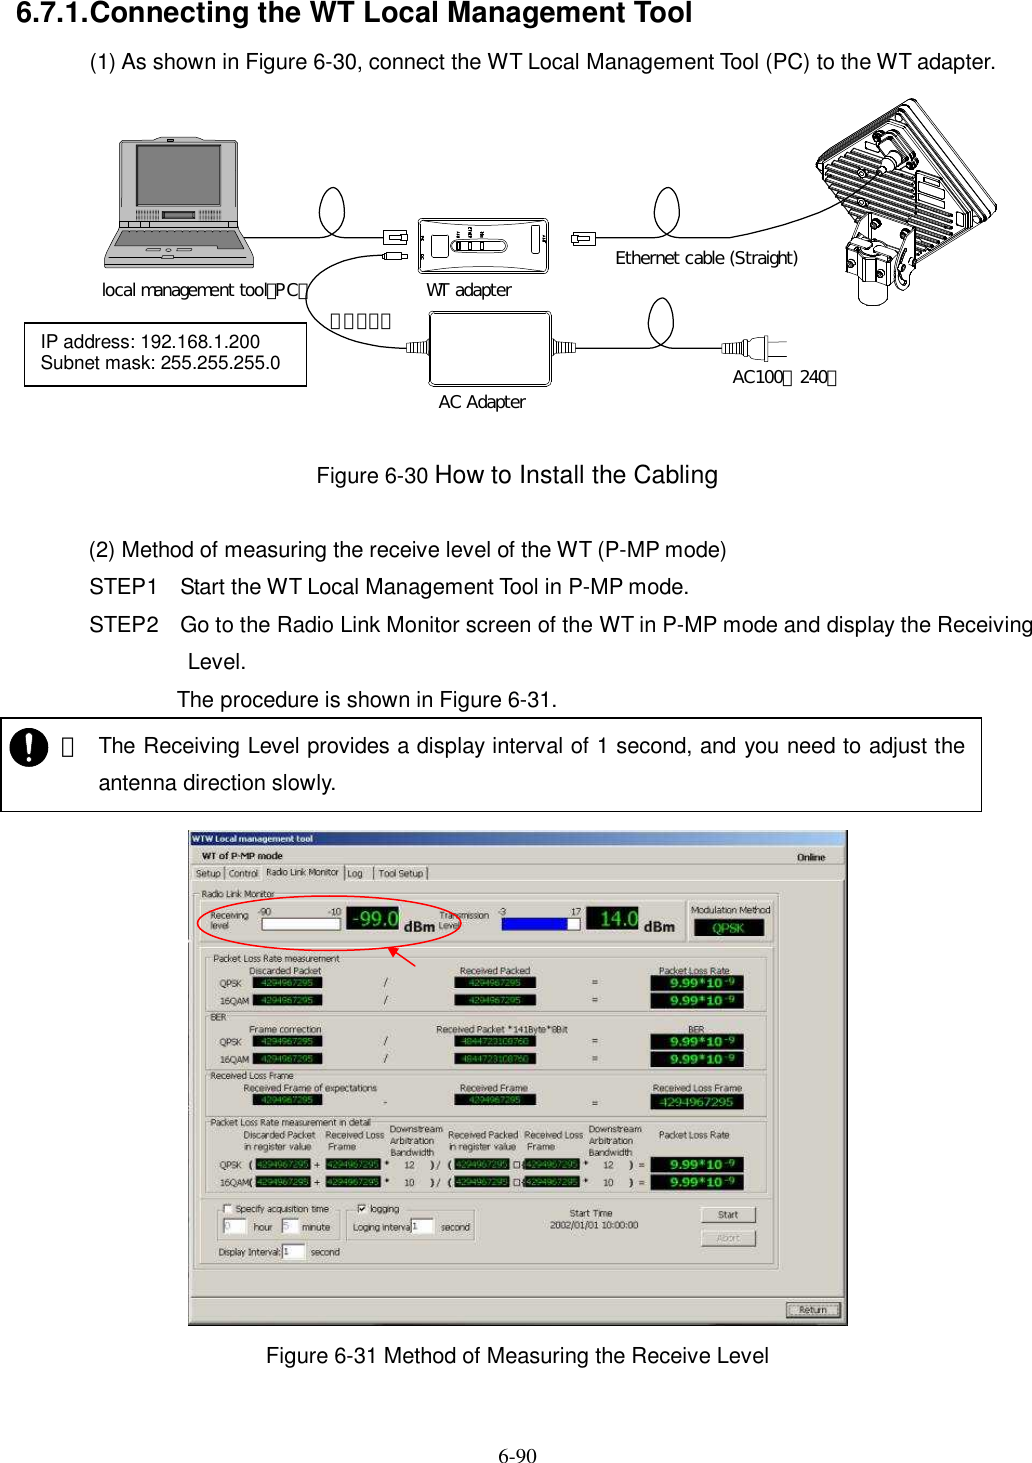   6-90 6.7.1. Connecting the WT Local Management Tool (1) As shown in Figure 6-30, connect the WT Local Management Tool (PC) to the WT adapter.  Figure 6-30 How to Install the Cabling  (2) Method of measuring the receive level of the WT (P-MP mode) STEP1 Start the WT Local Management Tool in P-MP mode. STEP2 Go to the Radio Link Monitor screen of the WT in P-MP mode and display the Receiving Level. The procedure is shown in Figure 6-31.   Figure 6-31 Method of Measuring the Receive Level WT adapterAC Adapter AC100∼240ＶＤＣ２４Ｖlocal management tool（PC）Ethernet cable (Straight)IP address: 192.168.1.200 Subnet mask: 255.255.255.0    ・ The Receiving Level provides a display interval of 1 second, and you need to adjust the antenna direction slowly.   